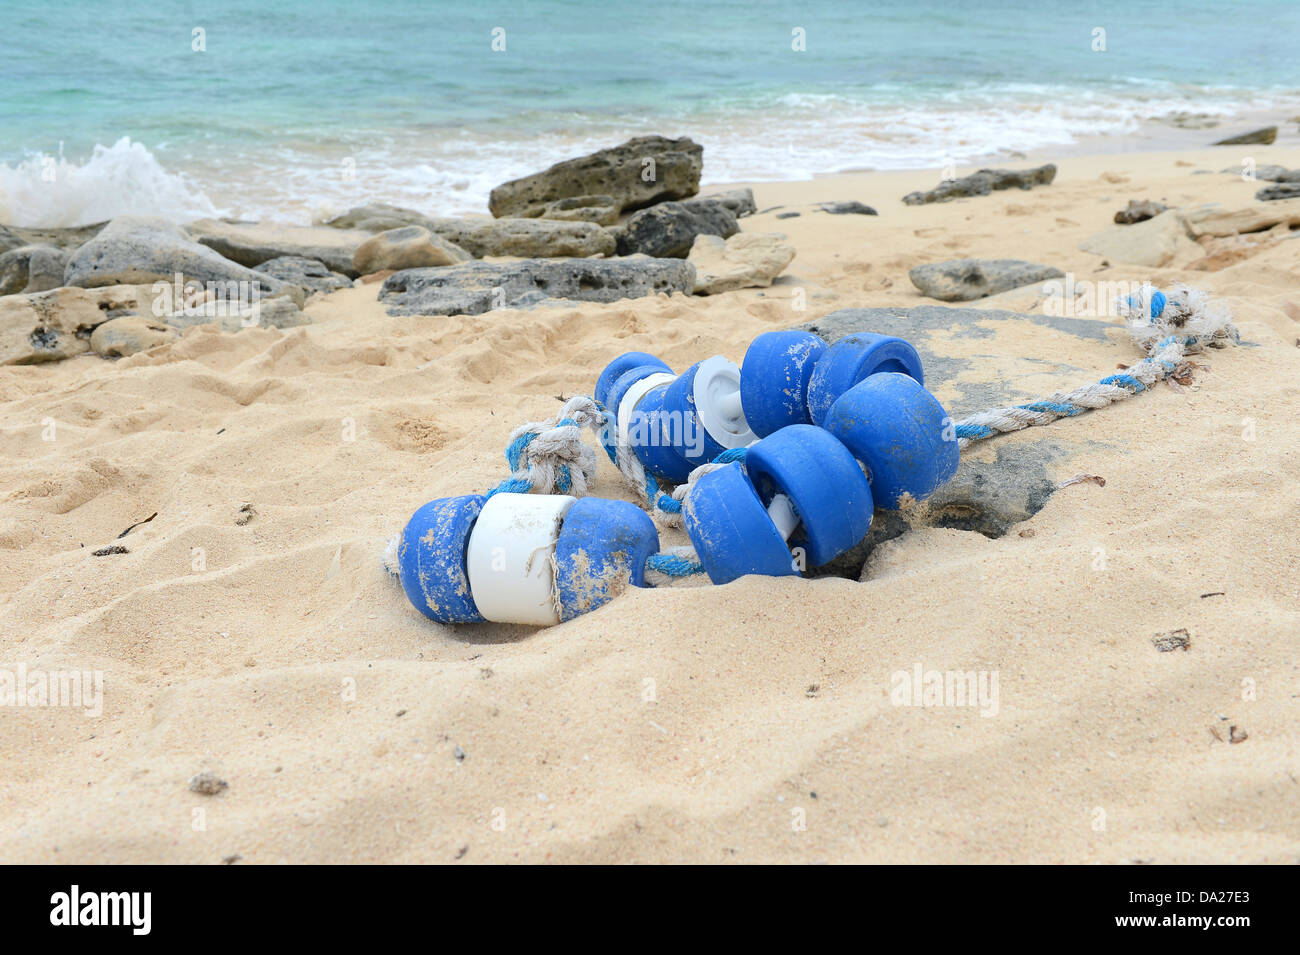 Debris from fishing nets on tropical beach in Caicos Island Stock Photo